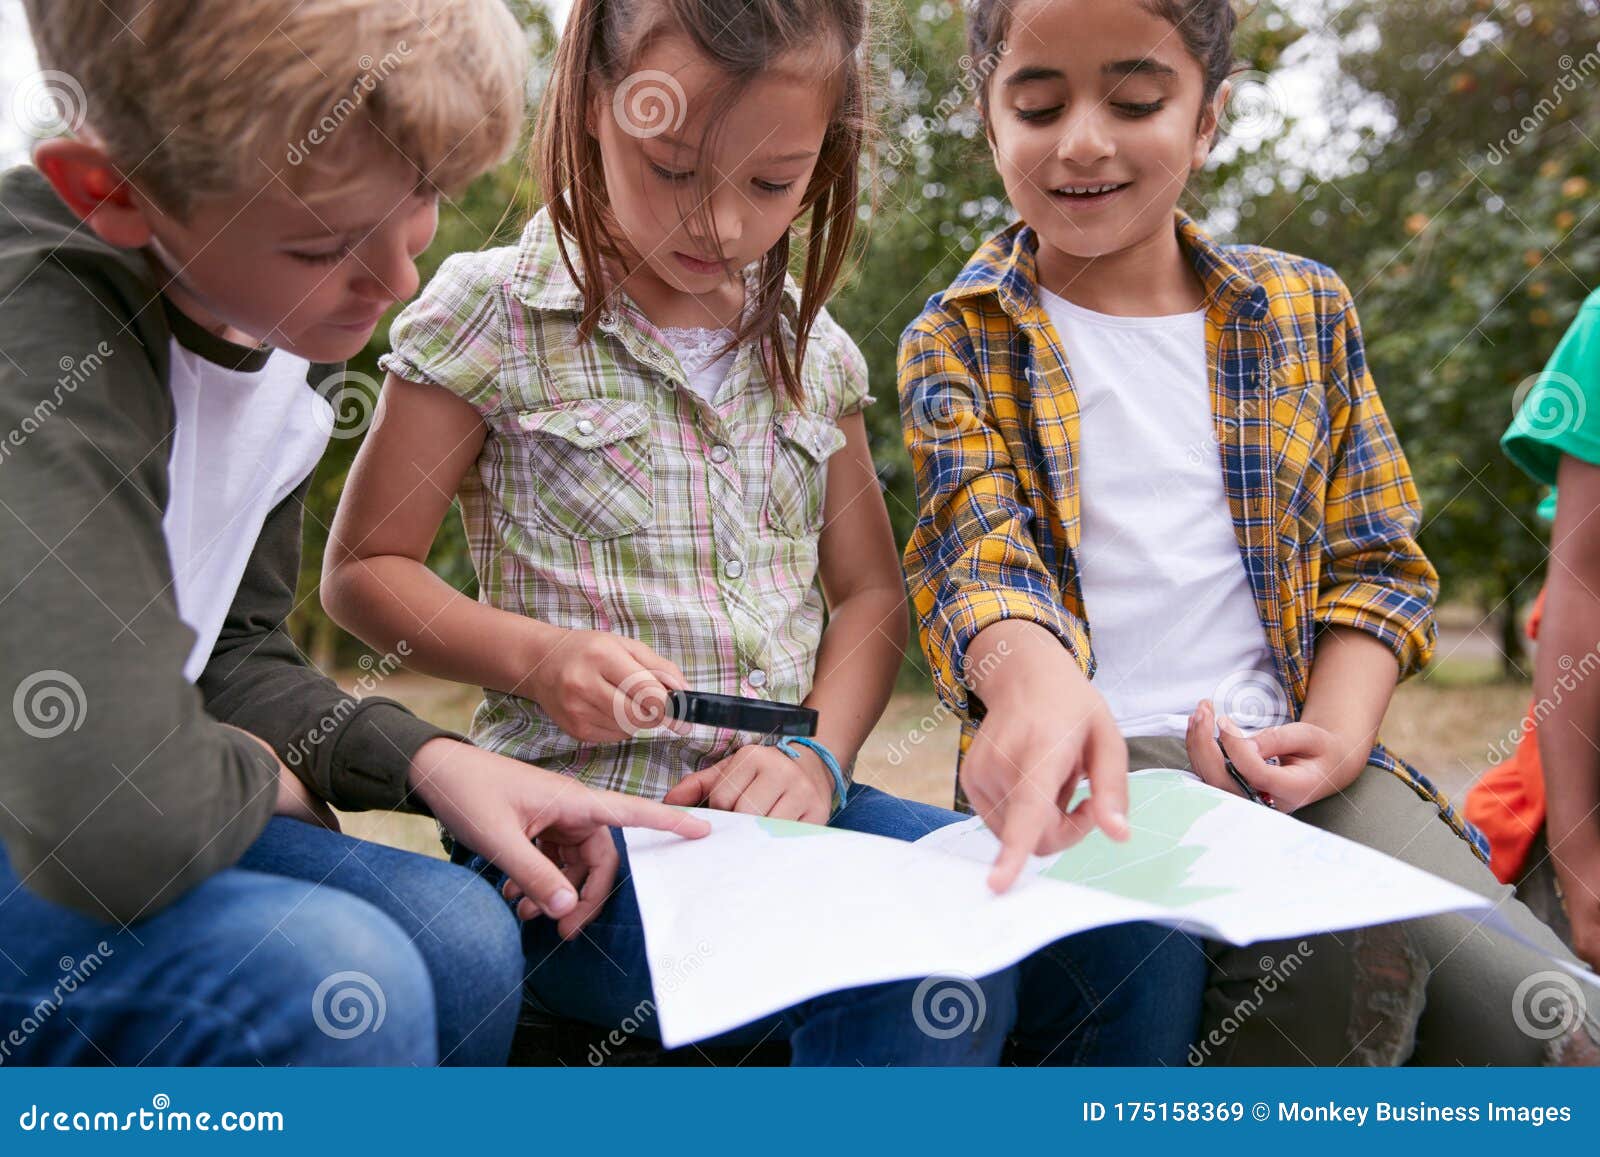 group of children on outdoor activity camping trip looking at map together